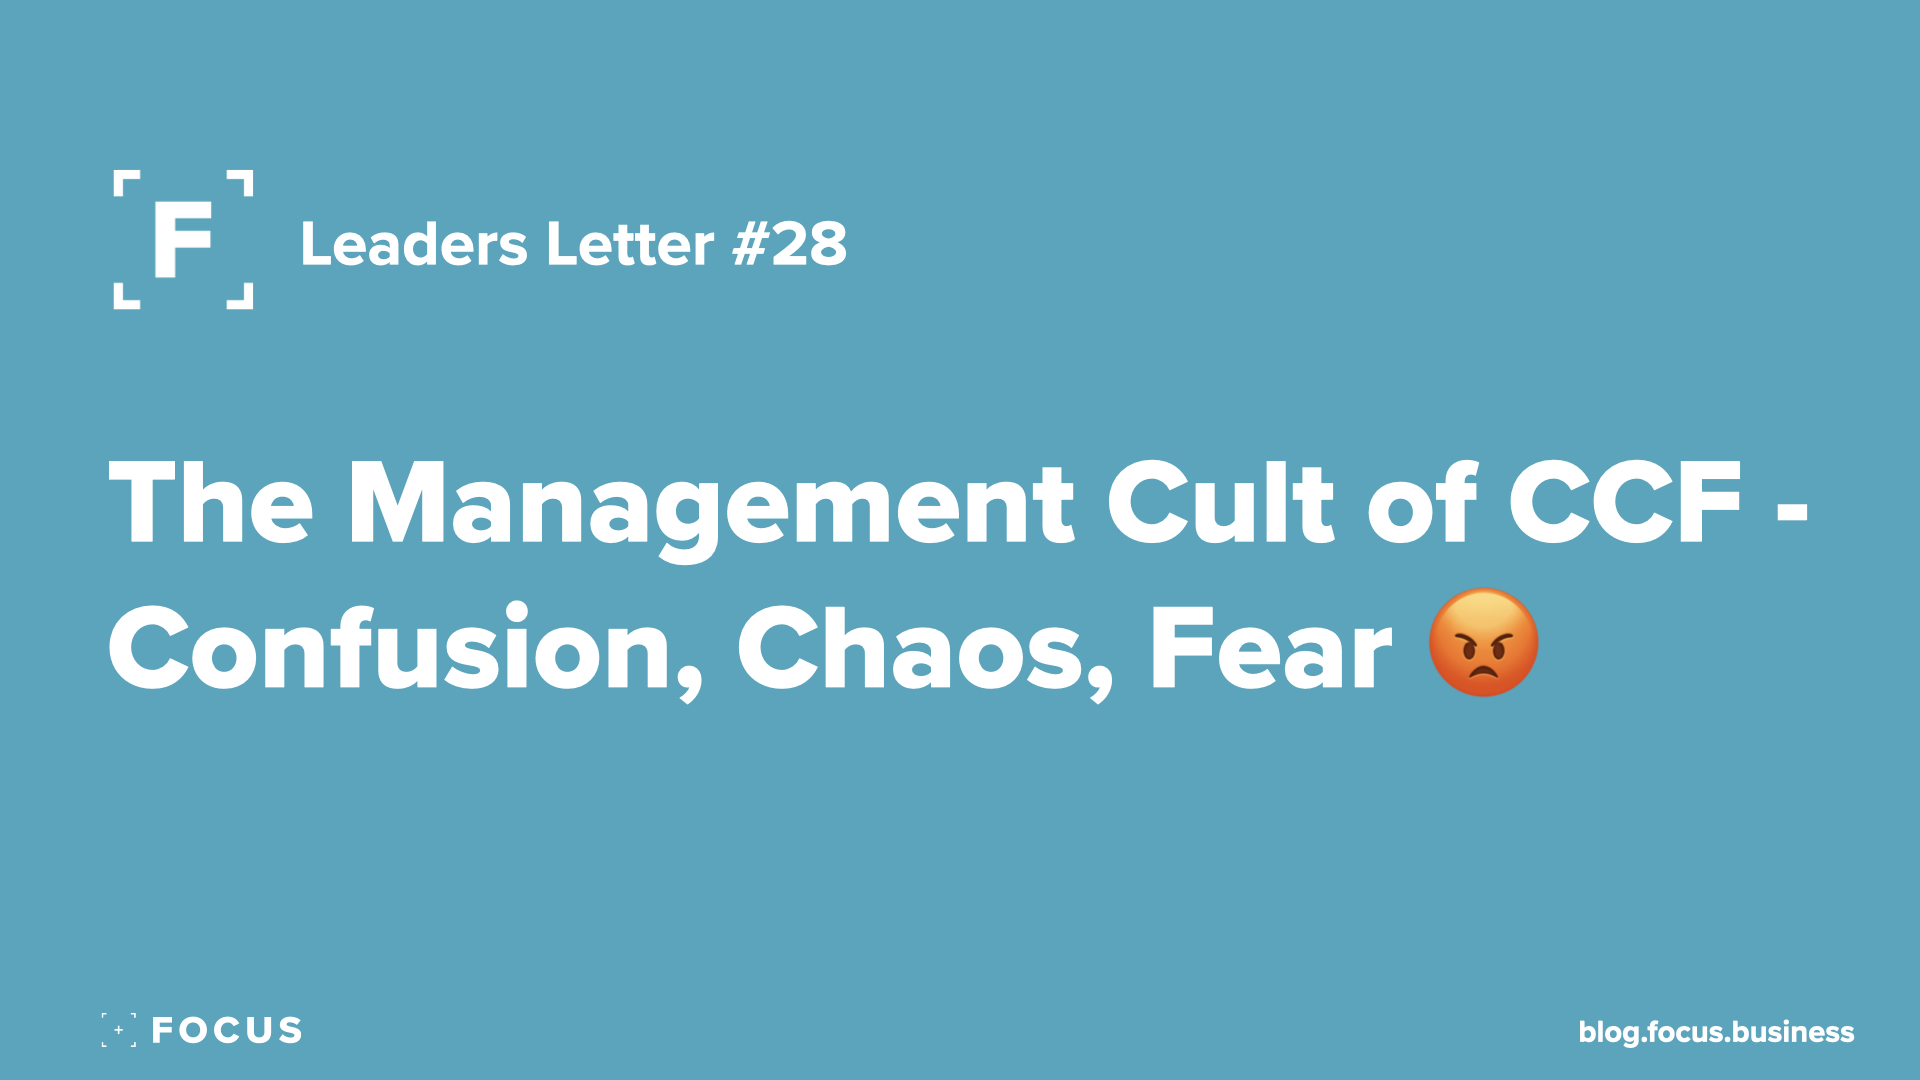 The Management Cult of CCF - Confusion, Chaos, Fear